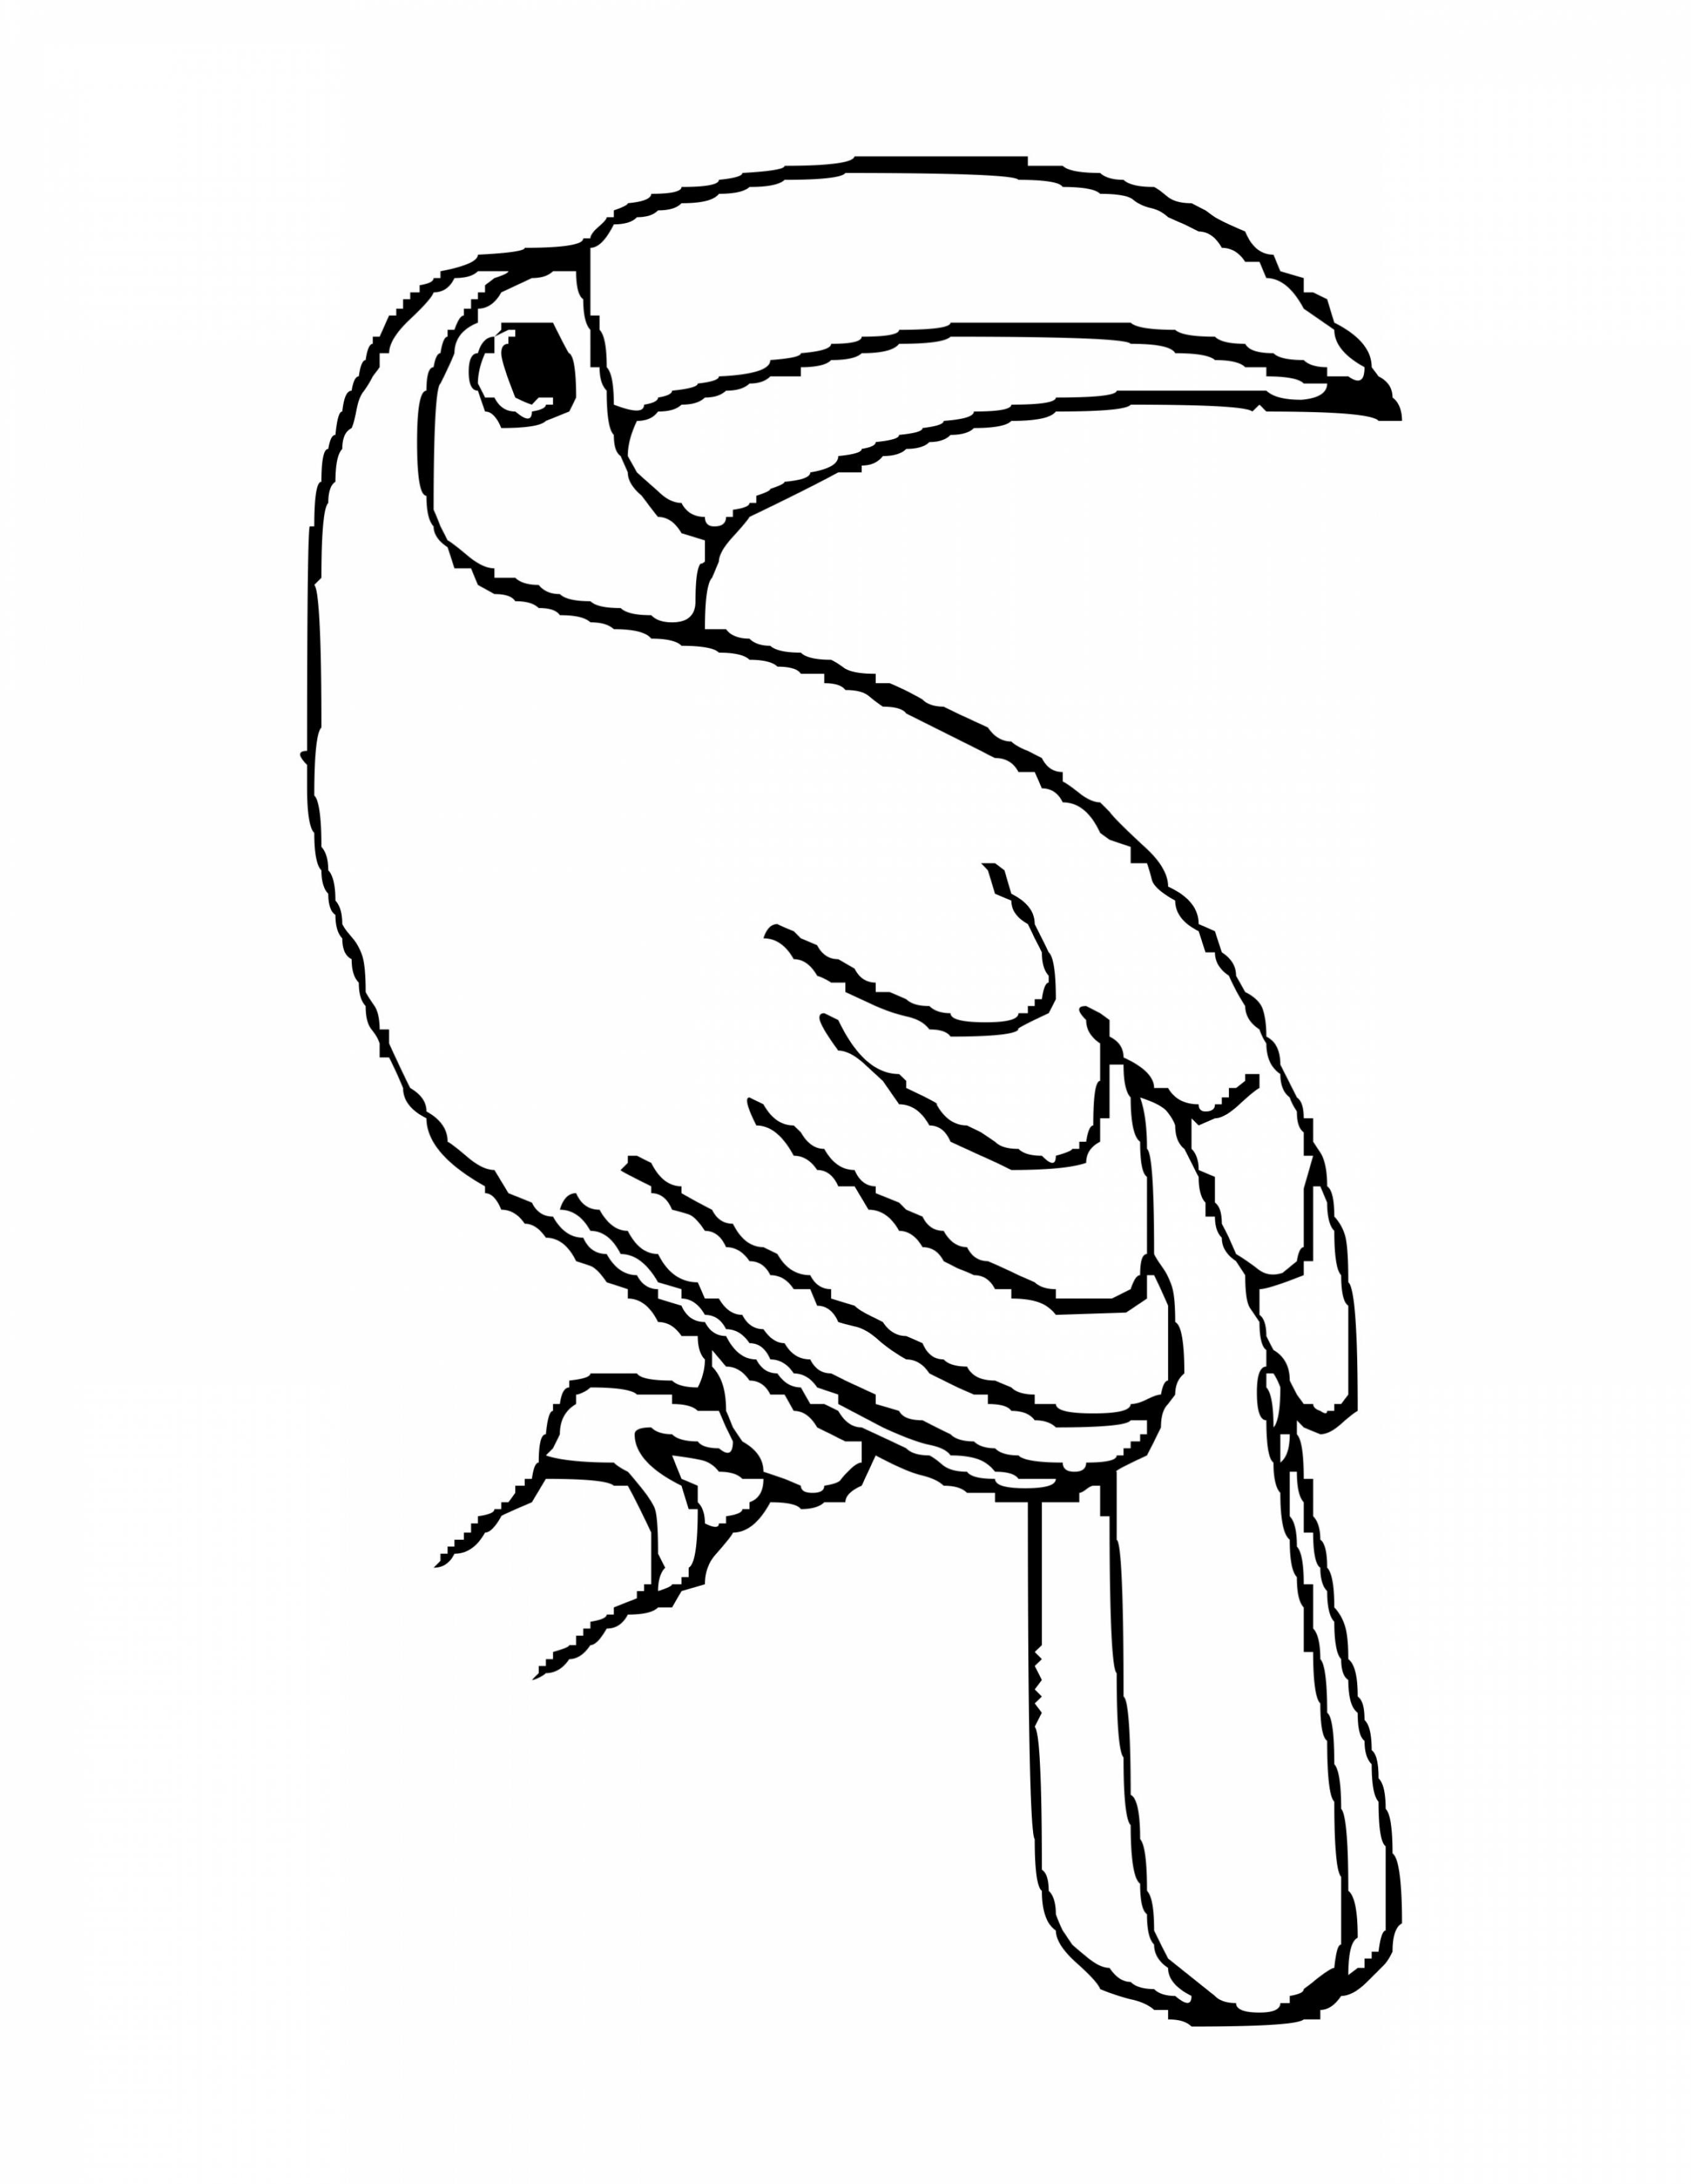 Toucan Coloring Pages - Best Coloring Pages For Kids